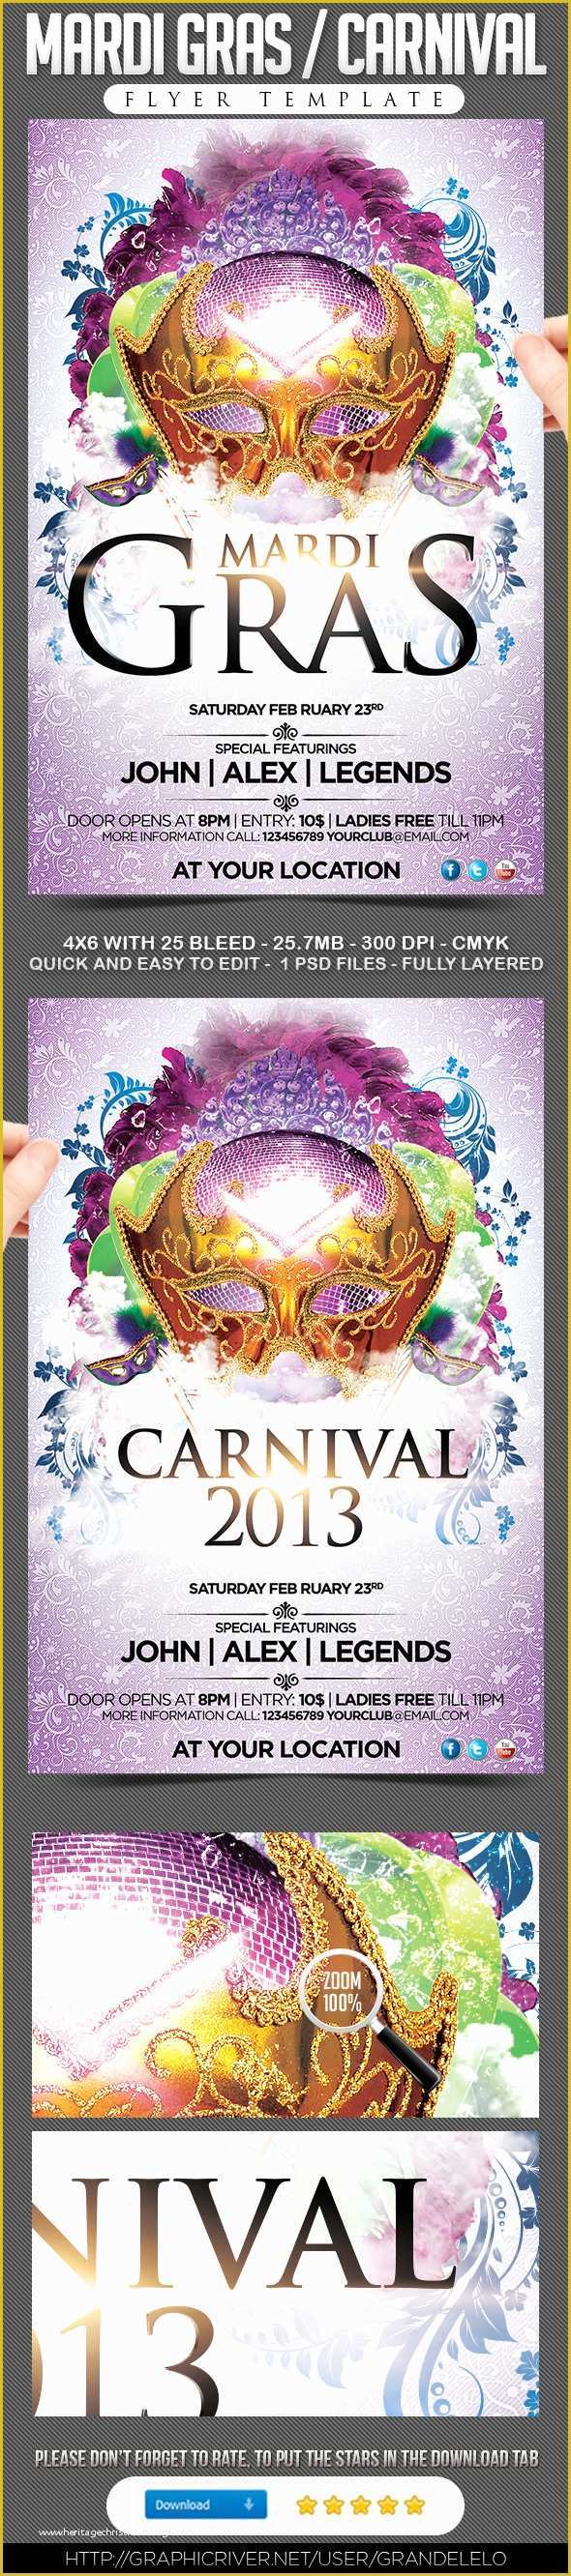 Mardi Gras Flyer Template Free Download Of Mardi Gras Carnival Flyer Template On Behance